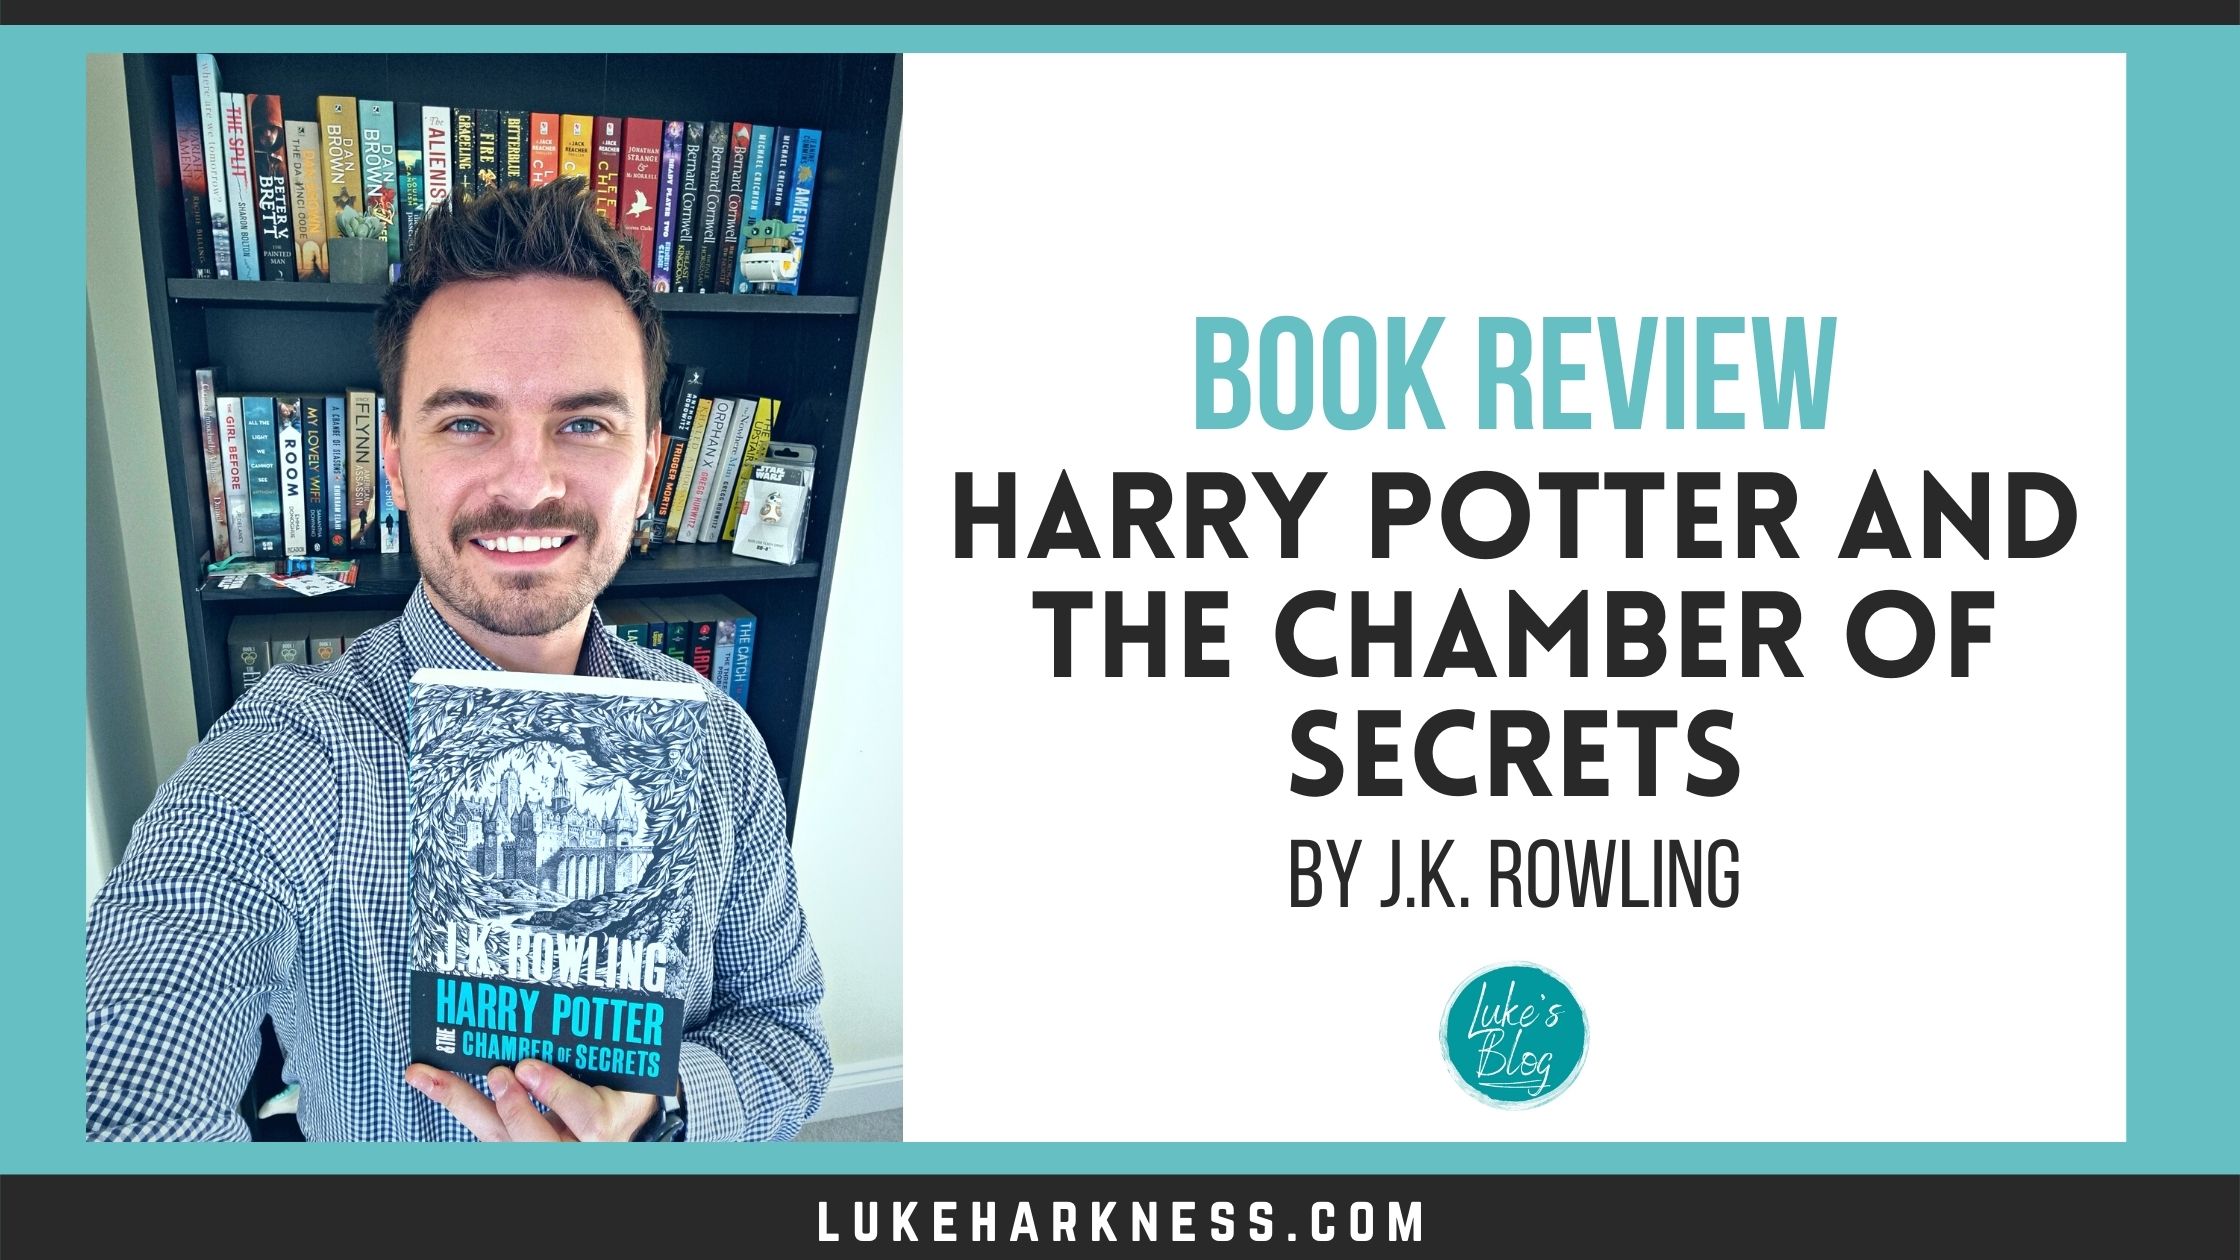 book review of harry potter for students